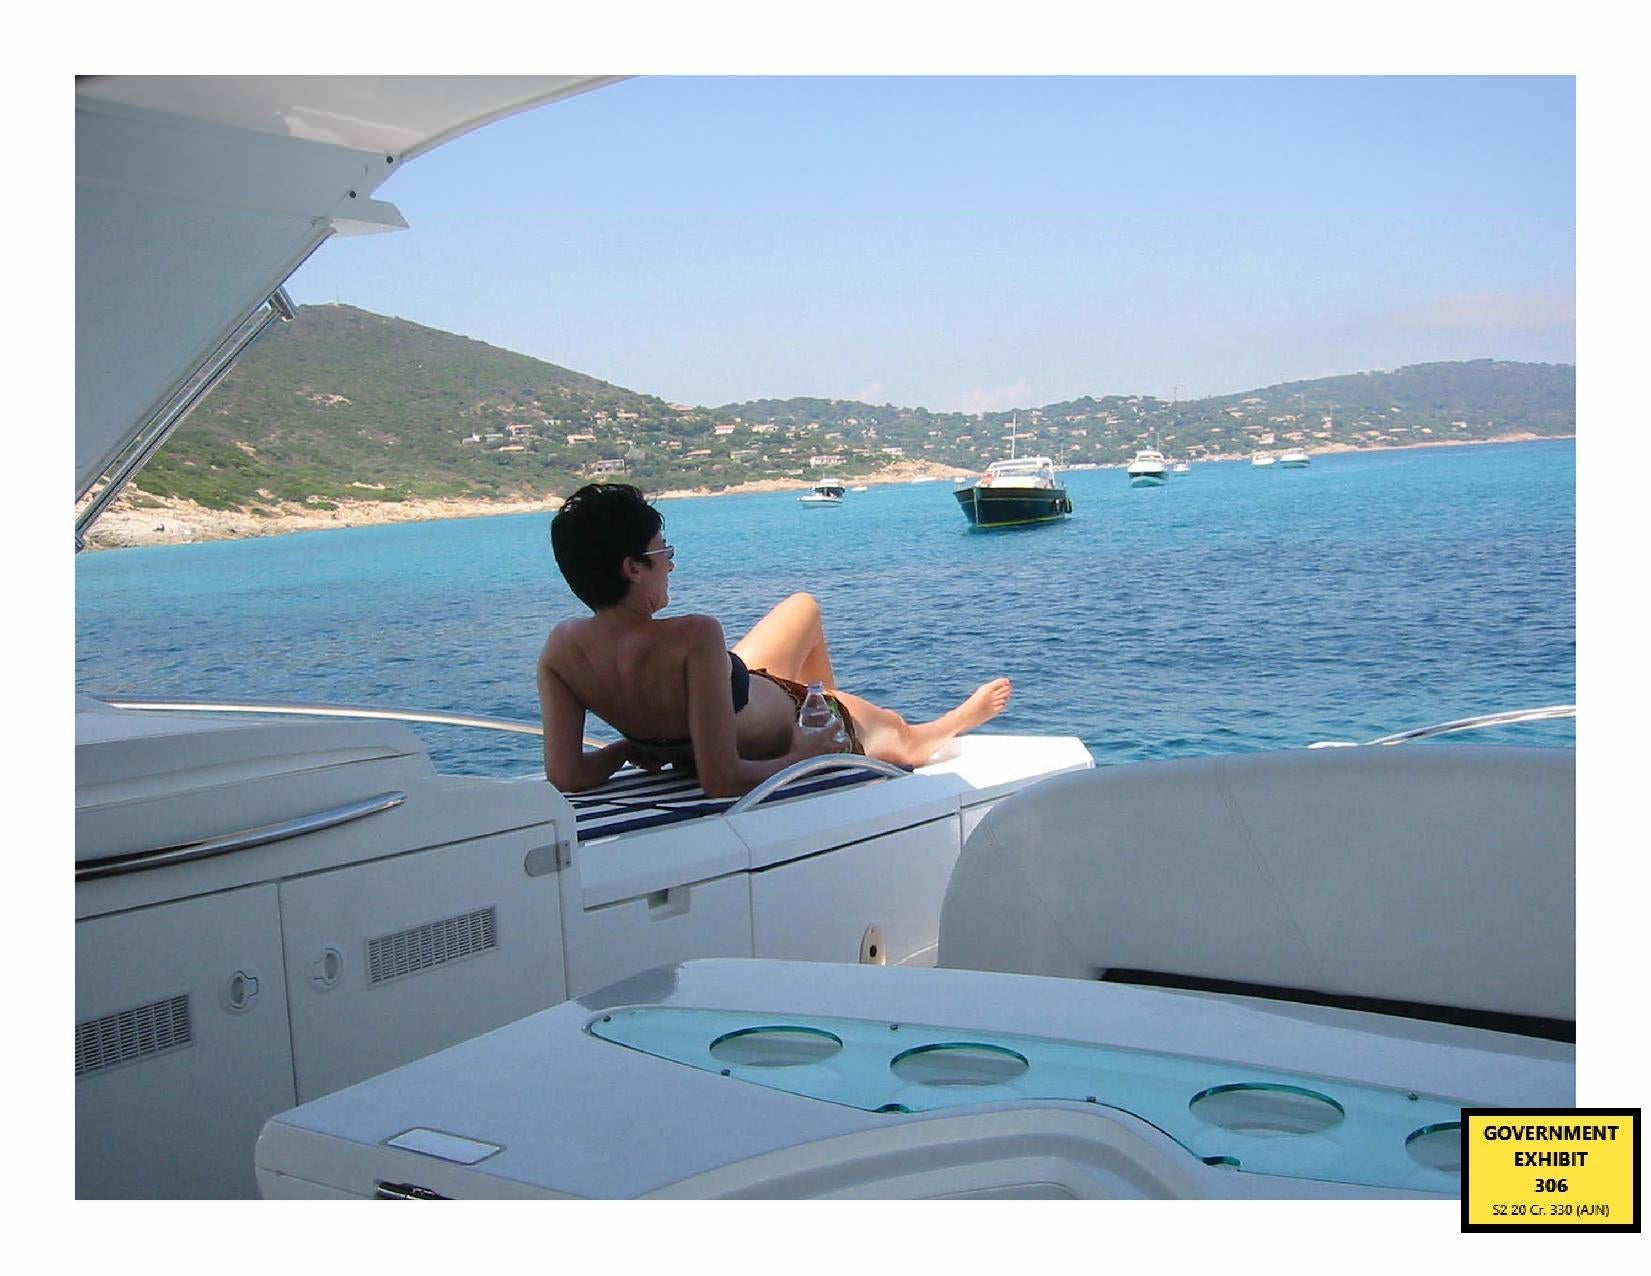 Ghislaine Maxwell sunbathing on a yacht (US Dept of Justice/PA)